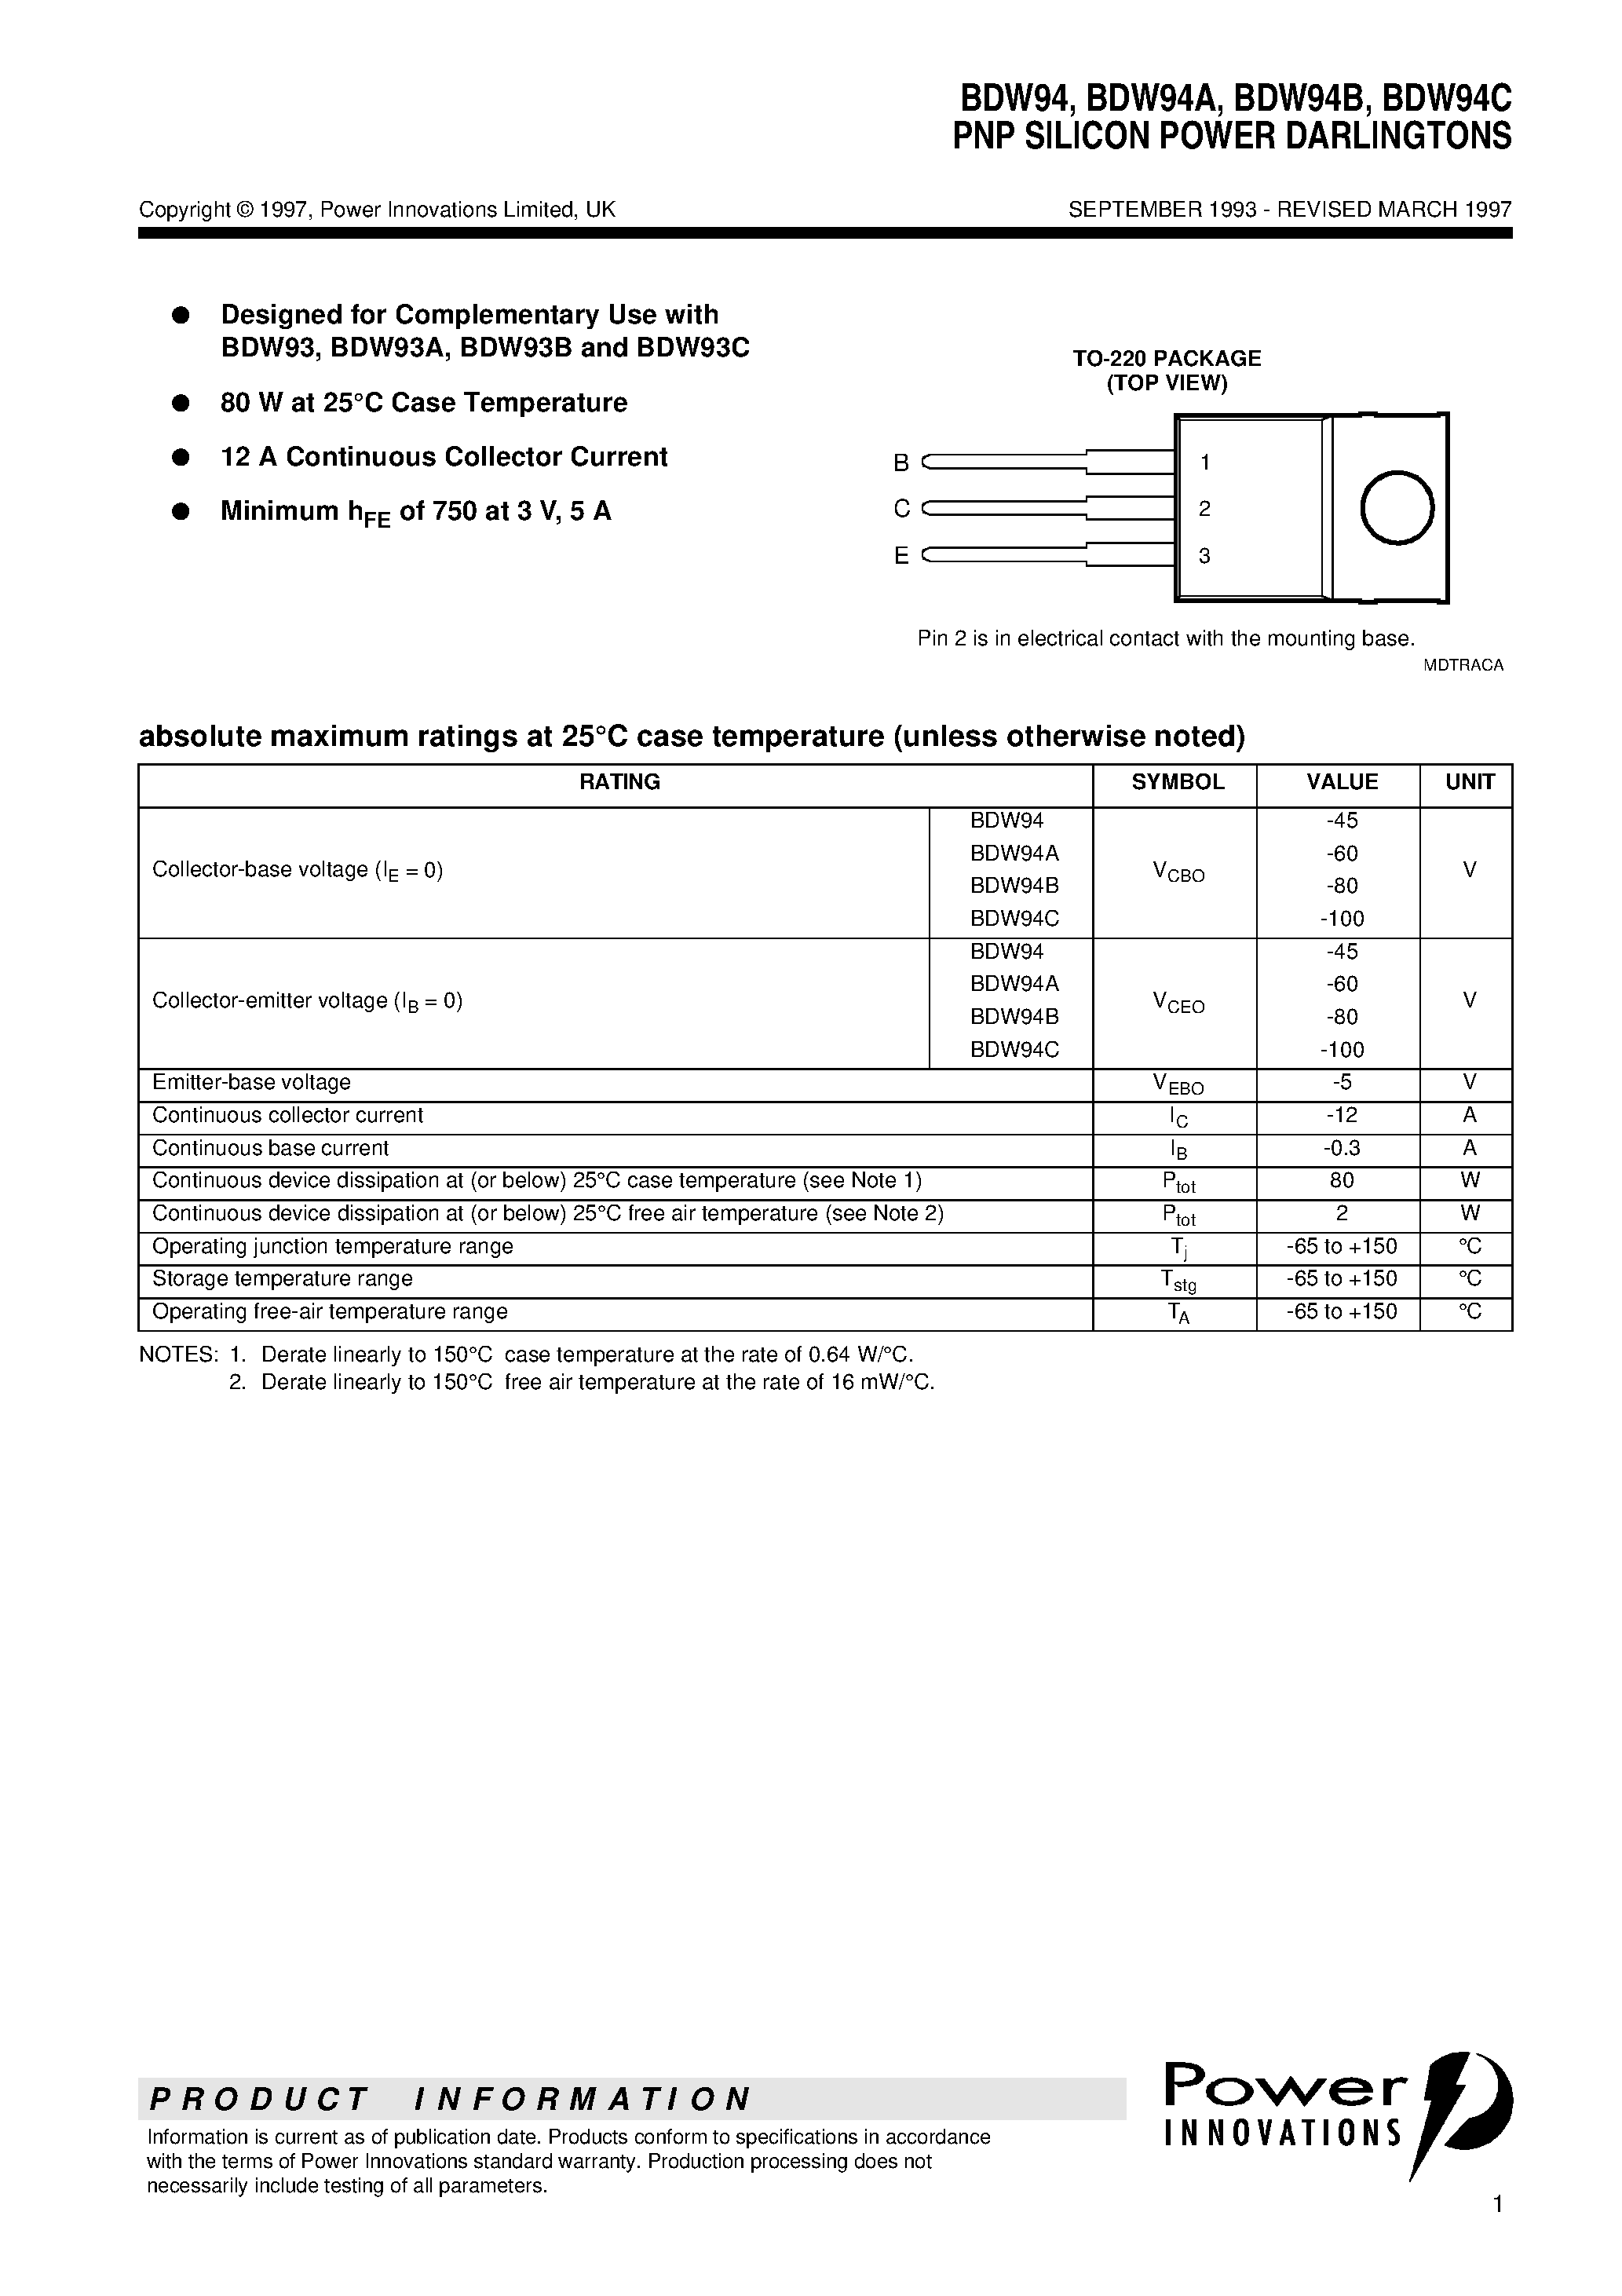 Datasheet BDW94 - PNP SILICON POWER DARLINGTONS page 1